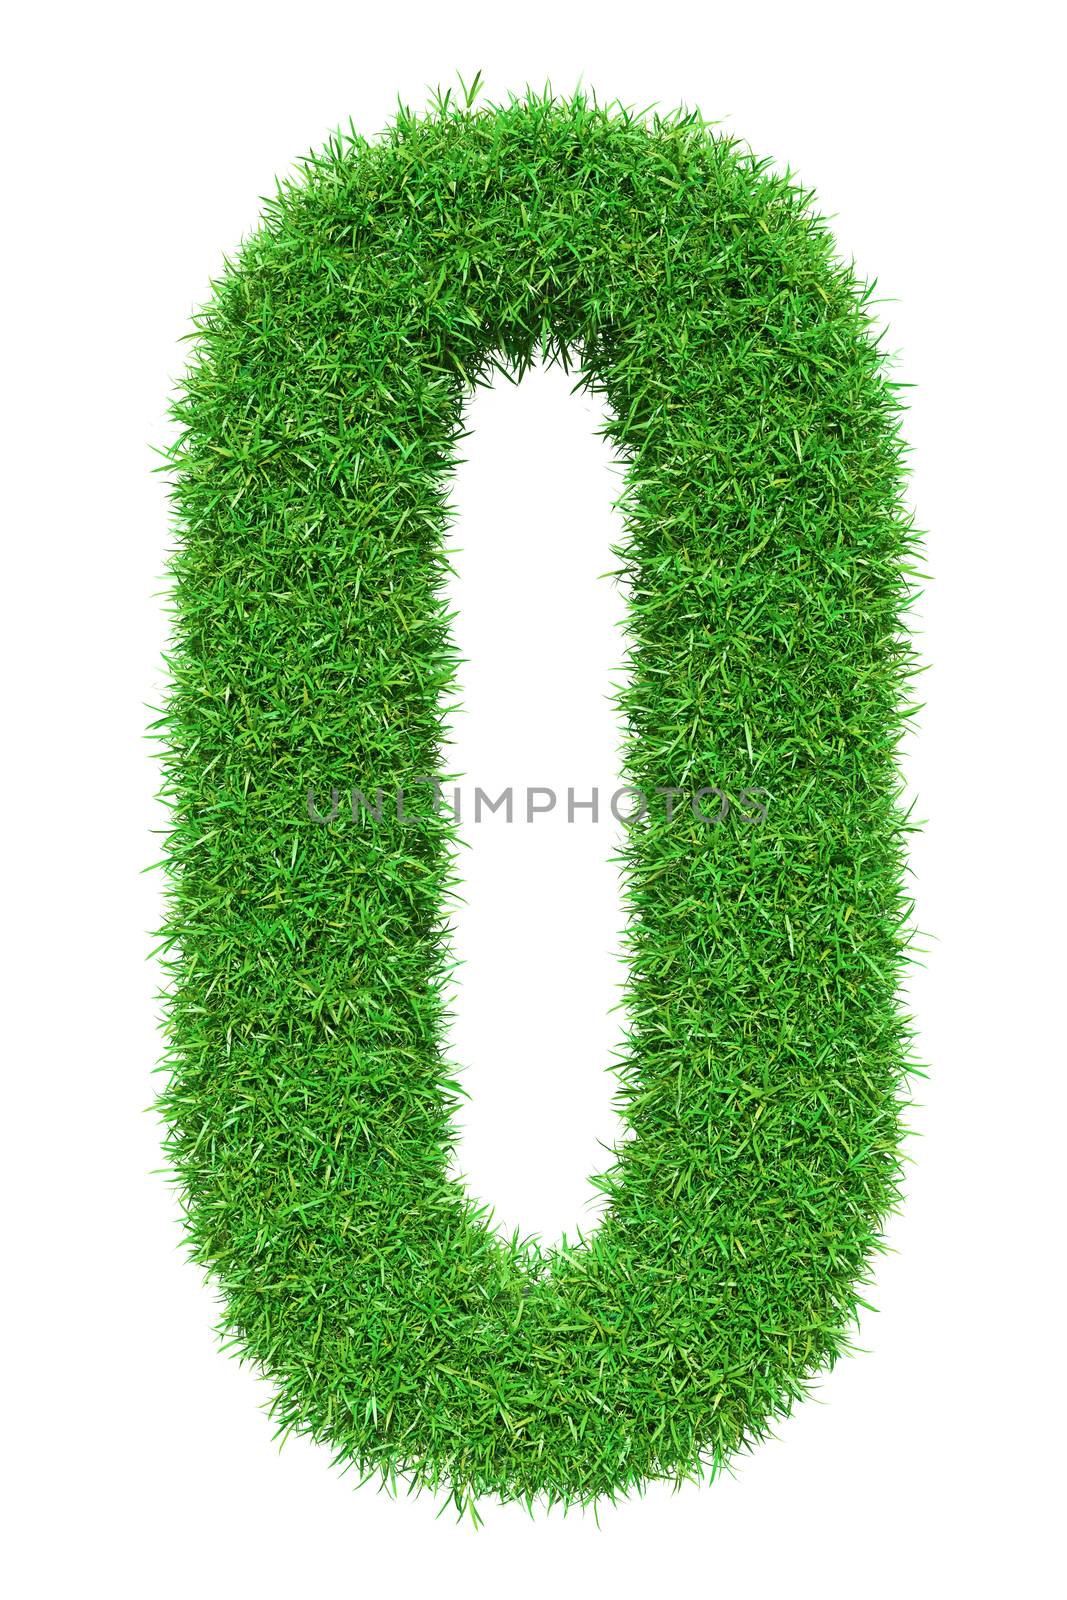 Green grass number 0, isolated on white background. 3D illustration